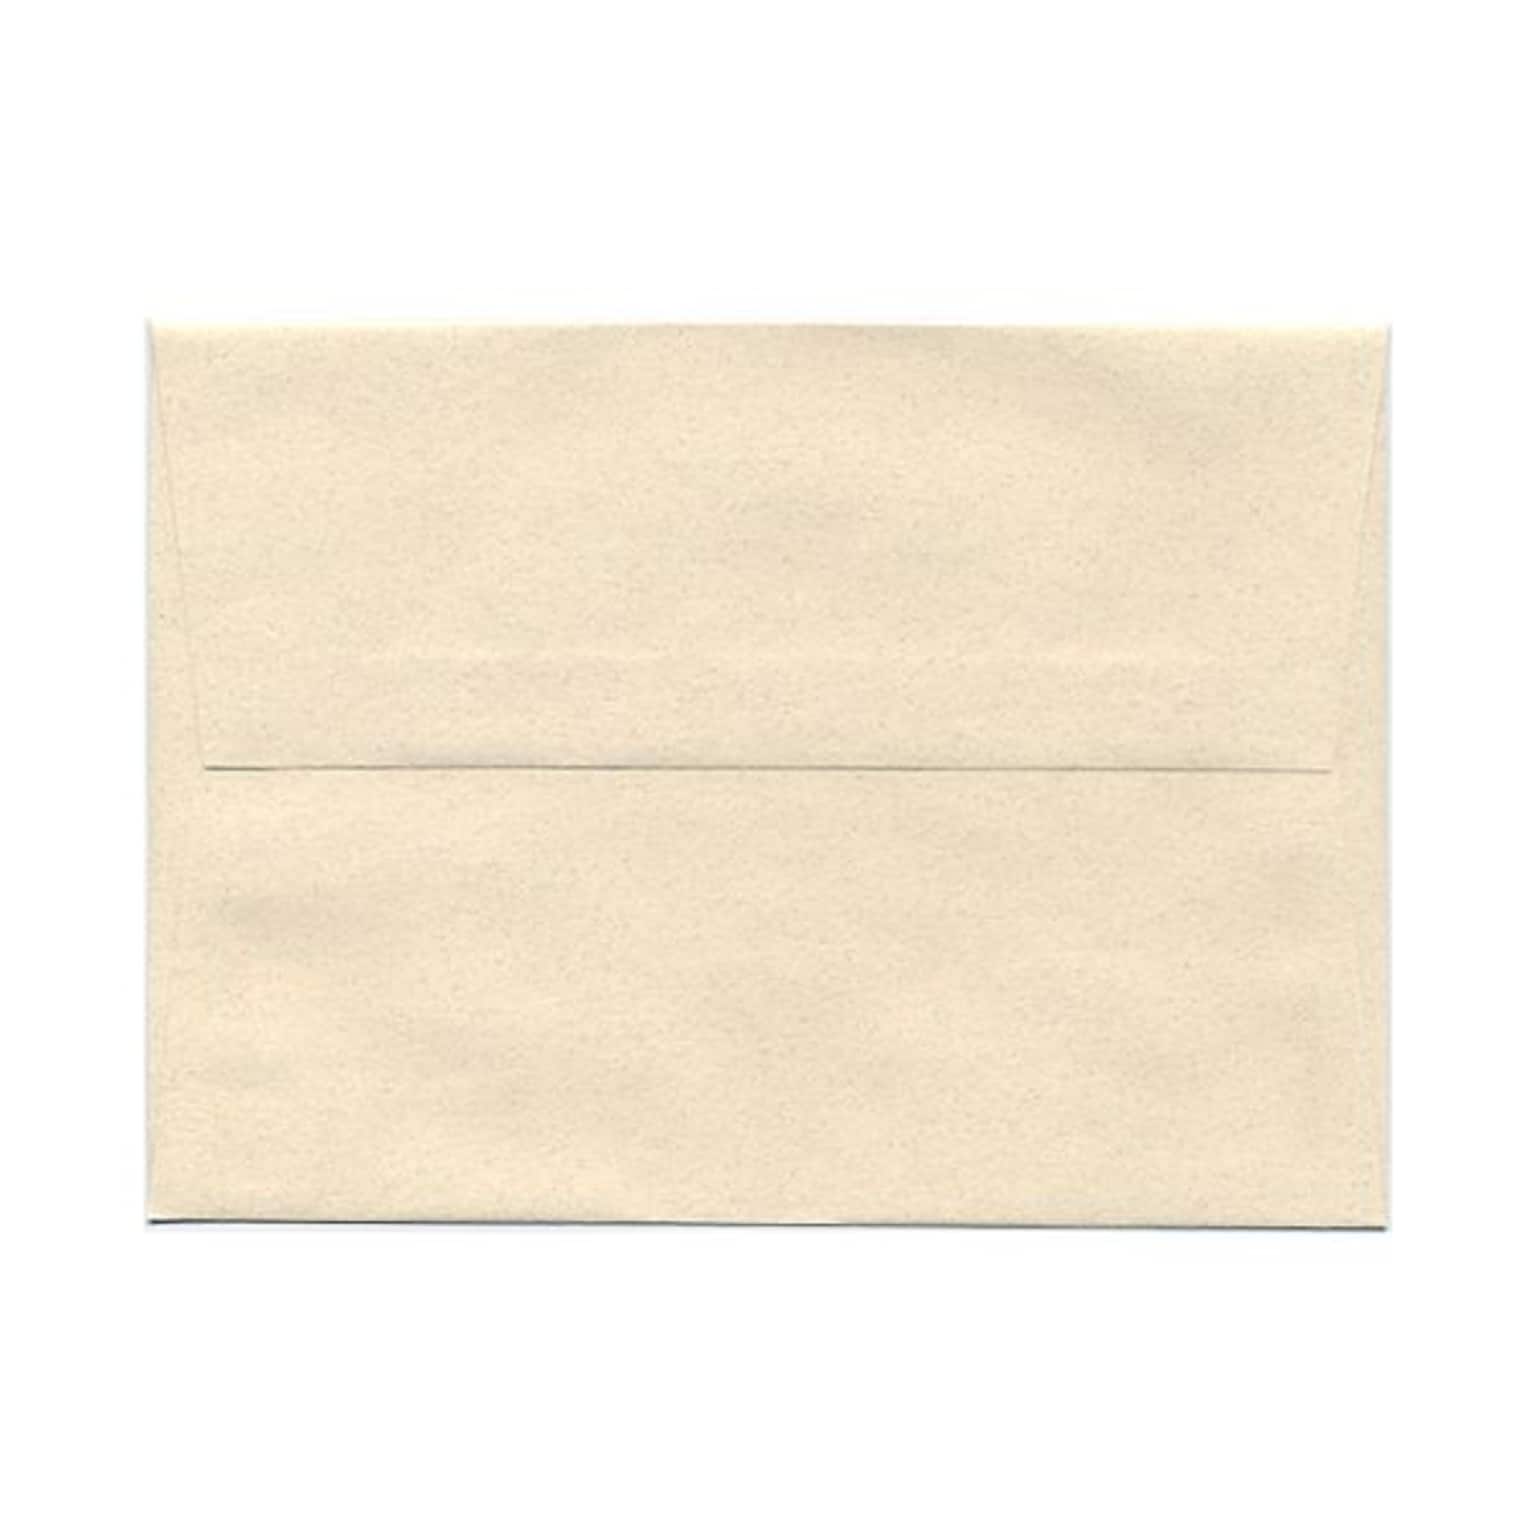 JAM Paper® A7 Passport Invitation Envelopes, 5.25 x 7.25, Gypsum Recycled, 25/Pack (CPPT703)